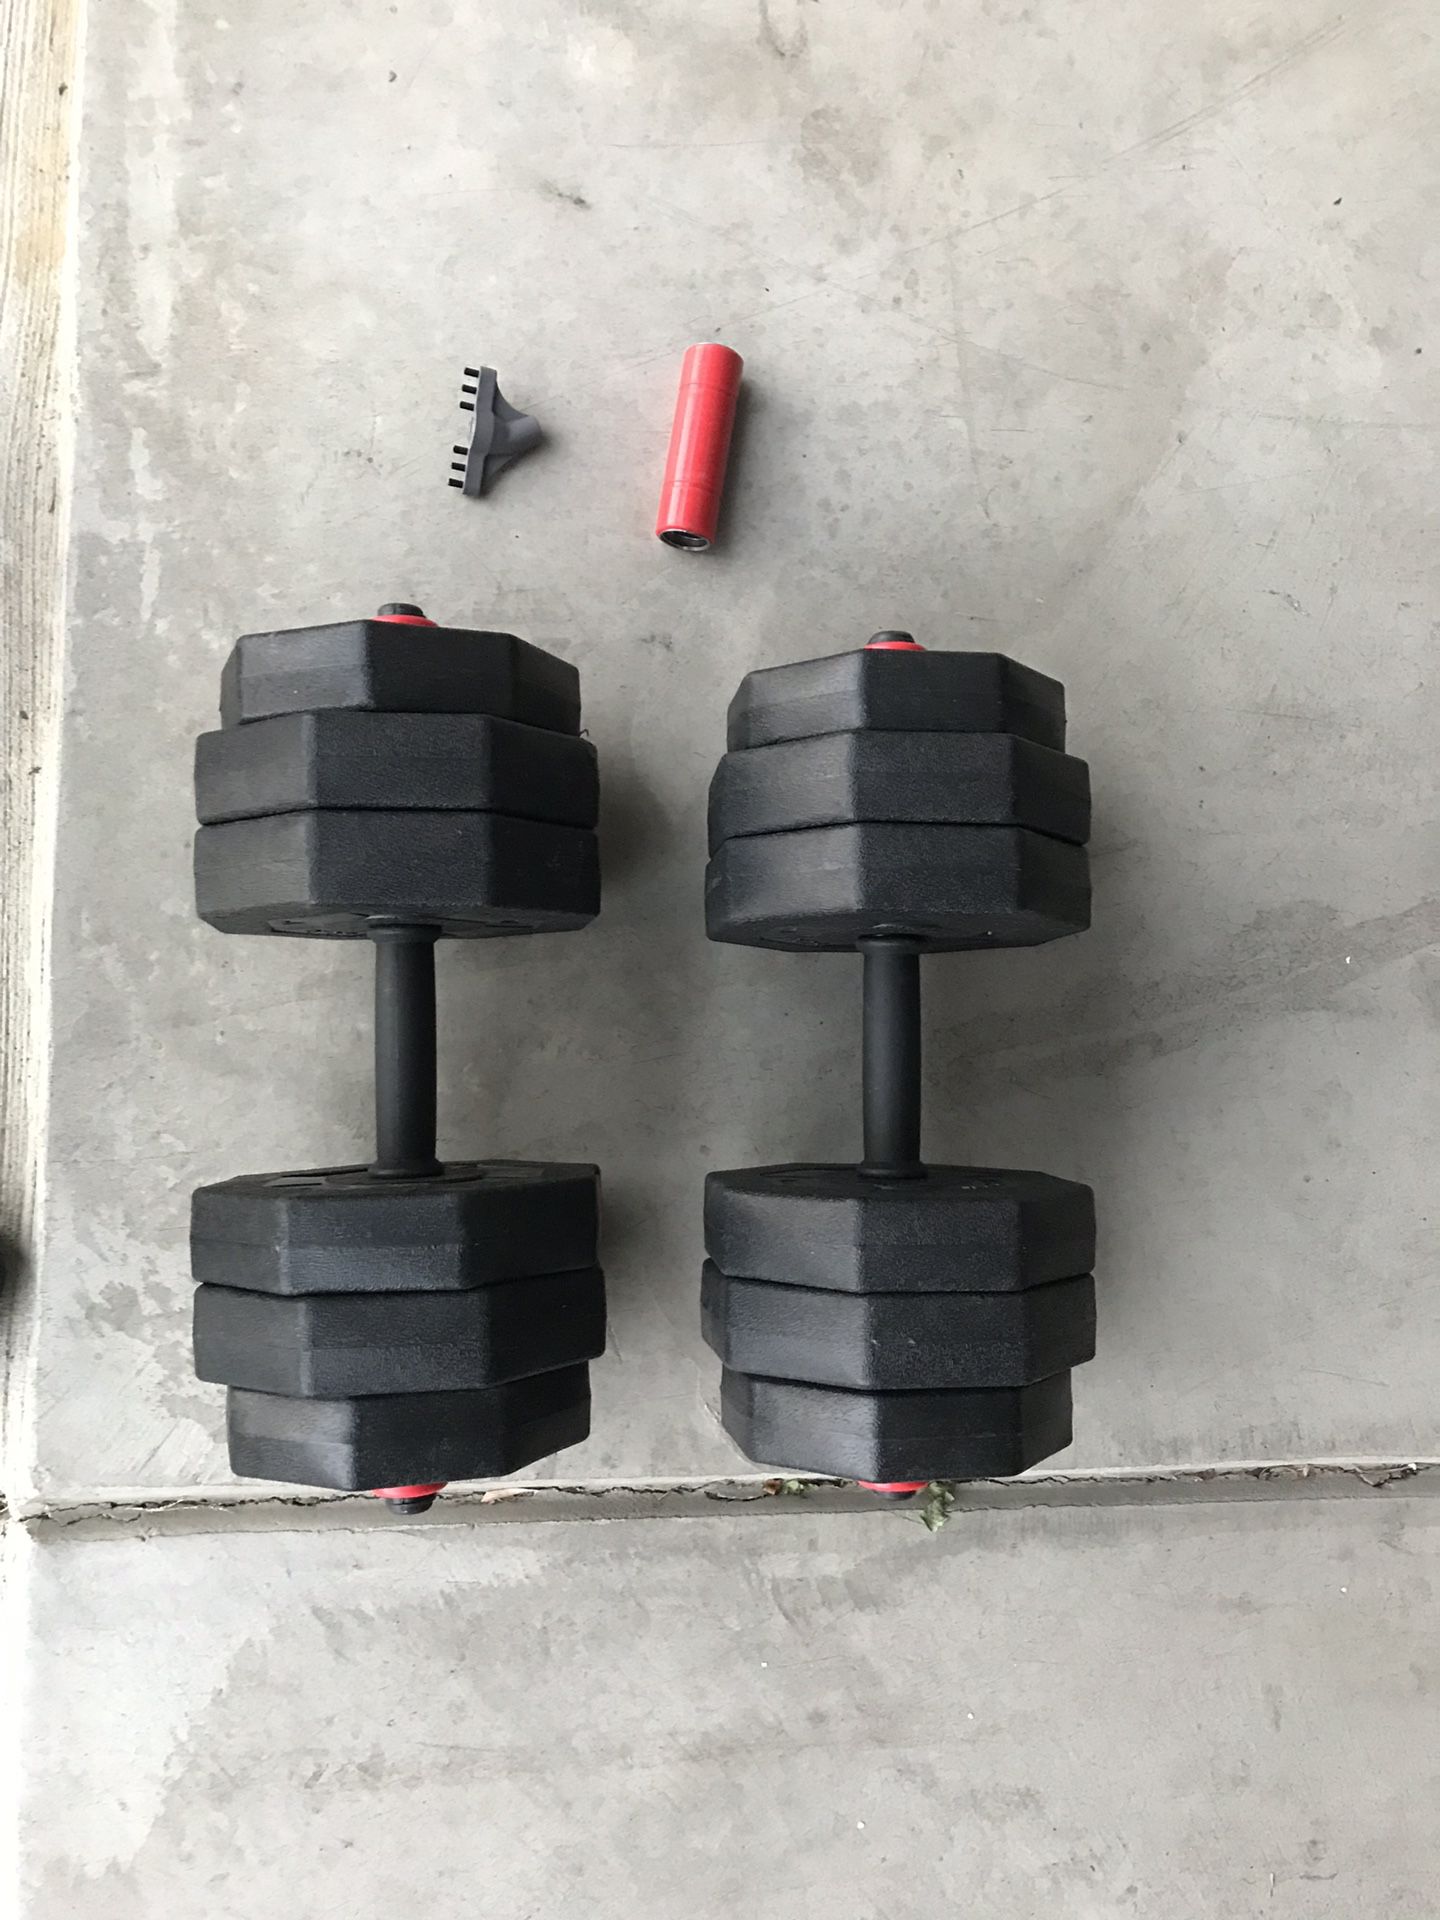 Weights 50 pounds with 2 dumbbell handles